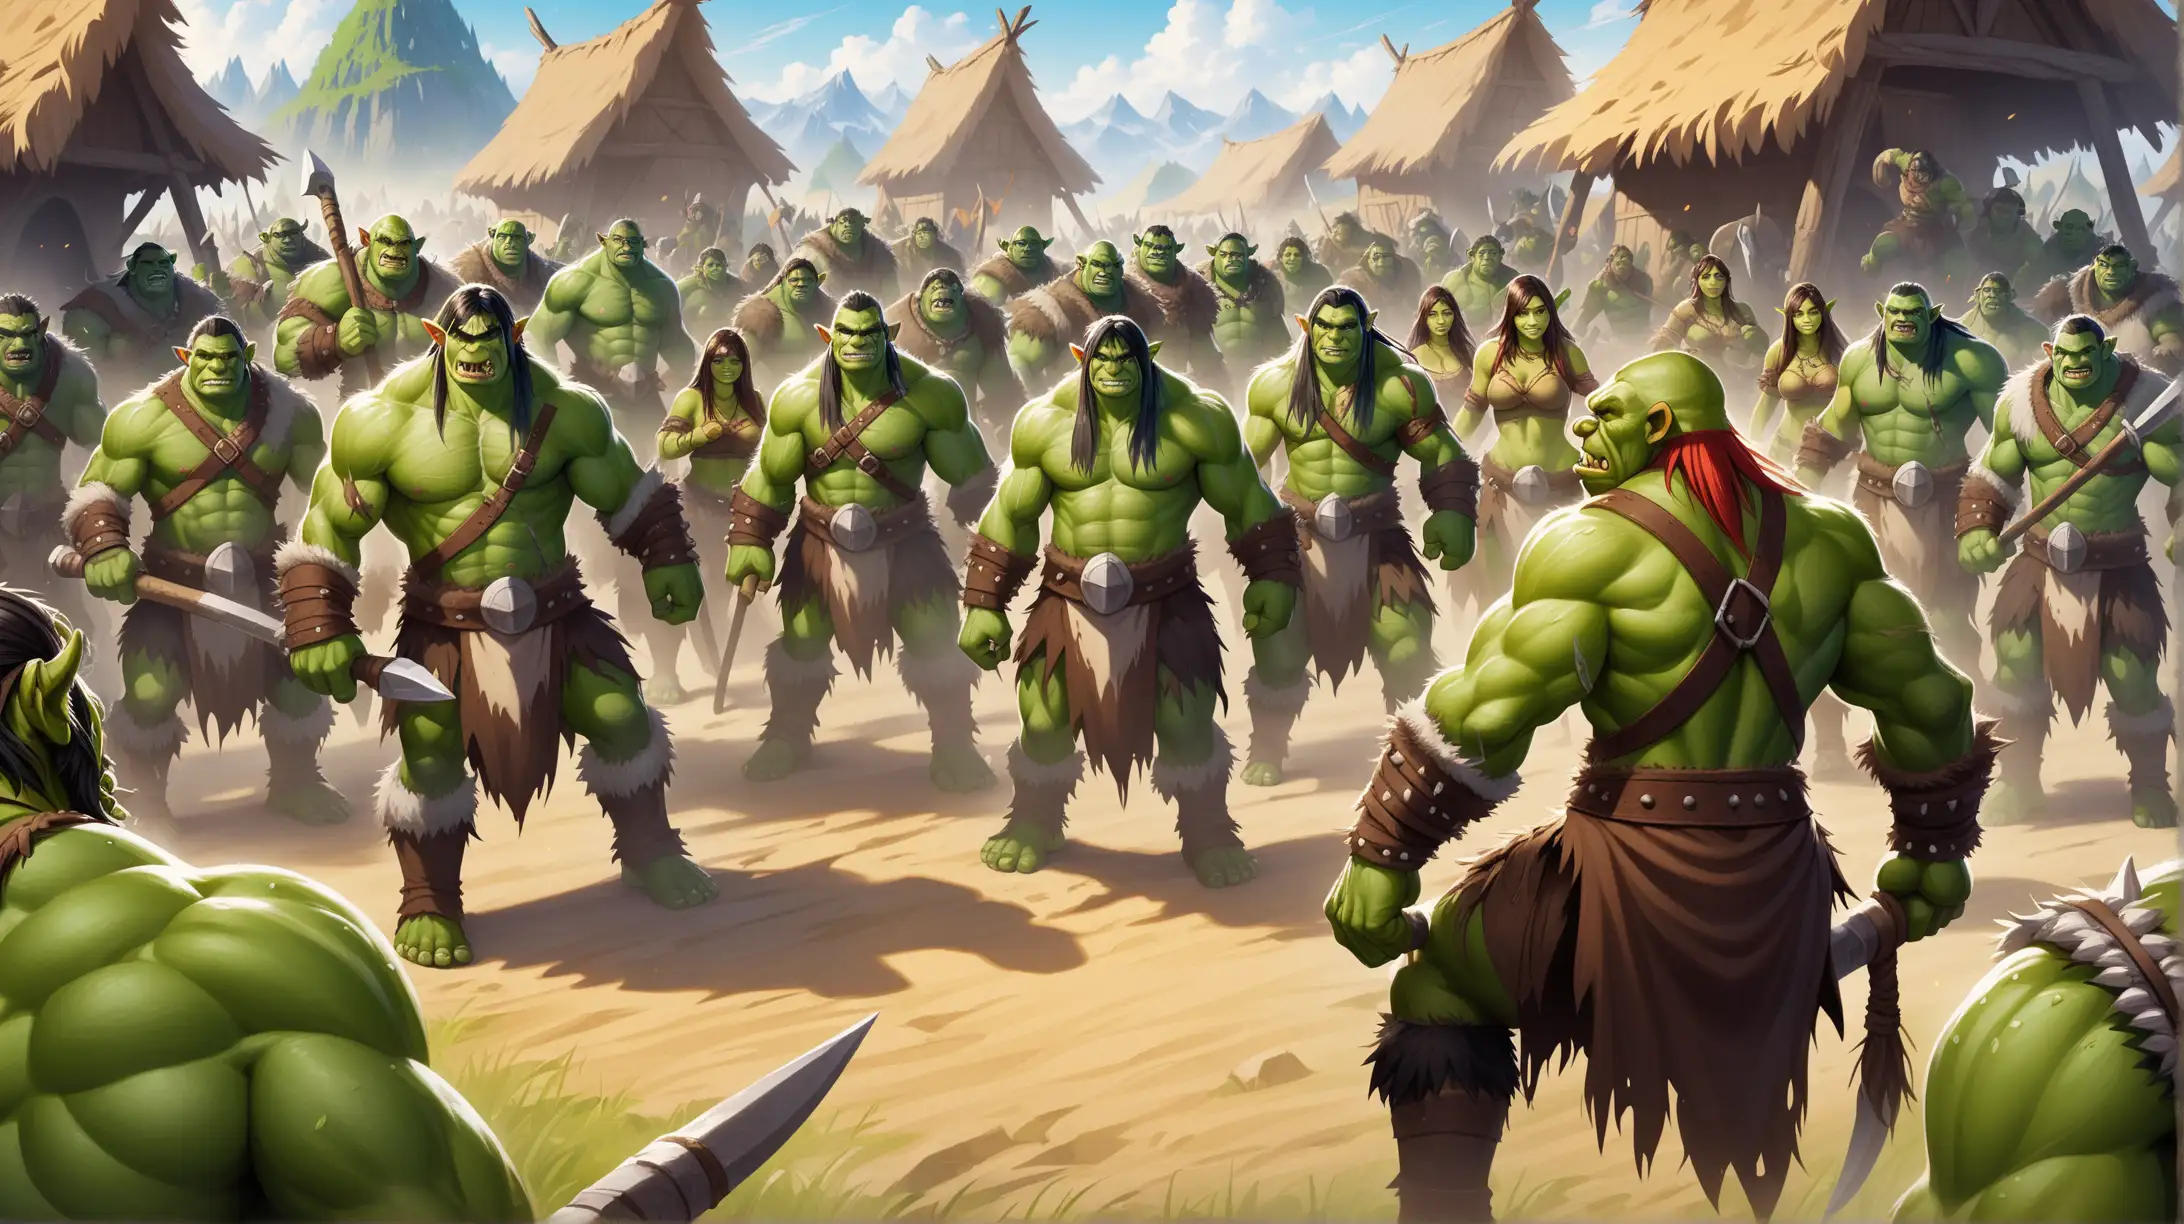 tribe of green orcs with green skin, barbarians and shamans, women and men, orc village, Medieval fantasy